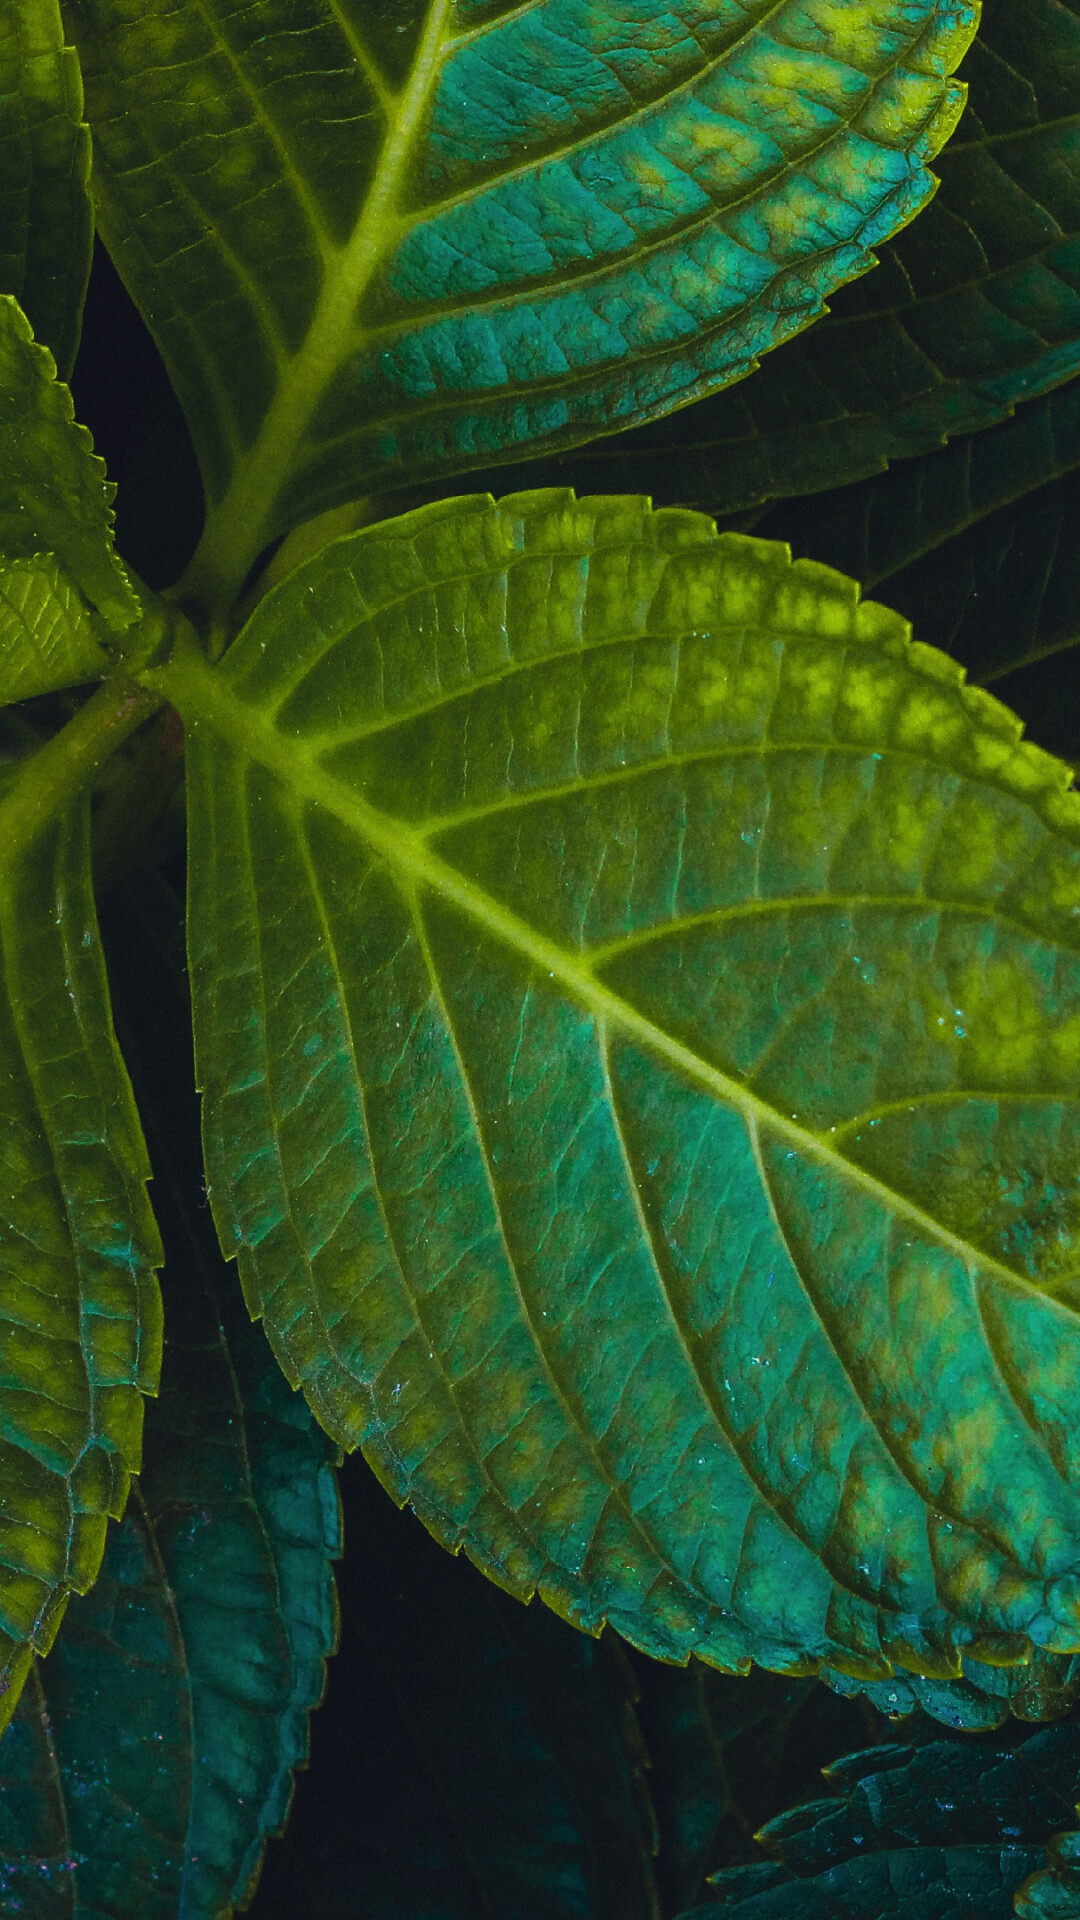 Leaves: A plant organ, Obtaining most of the energy from sunlight via photosynthesis. 1080x1920 Full HD Wallpaper.